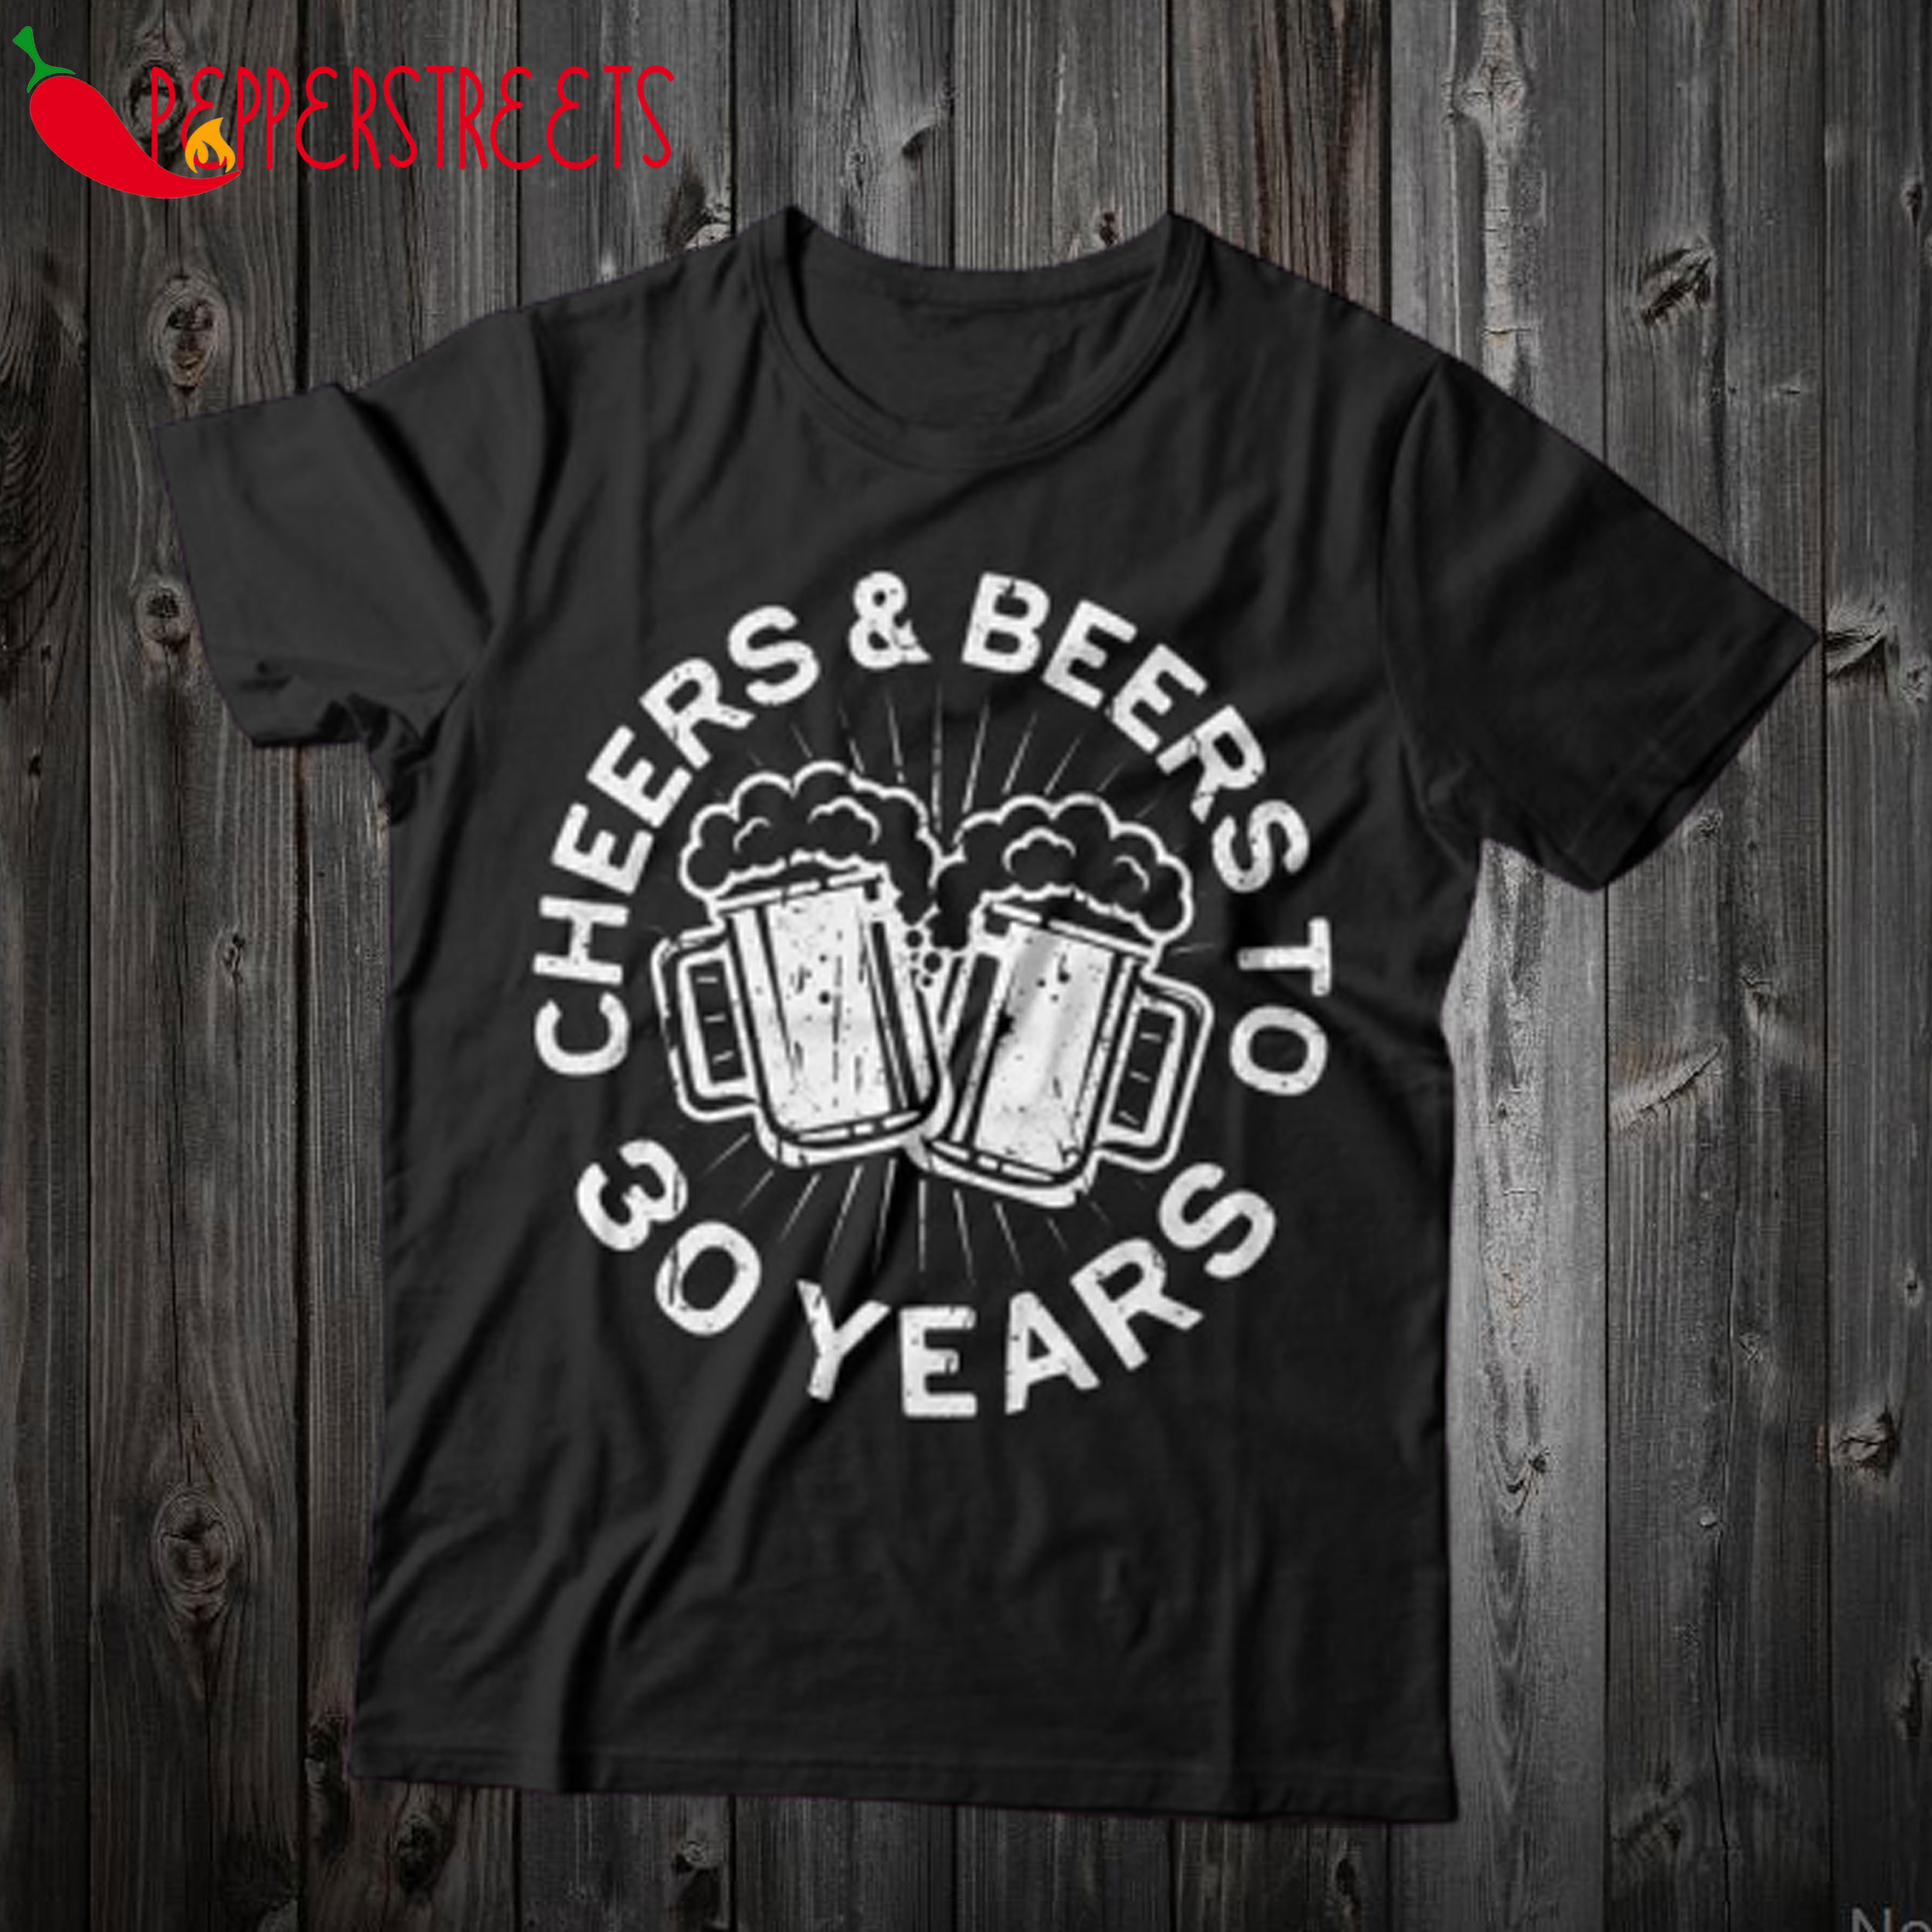 Cheers And Beers To 30 Years T Shirt